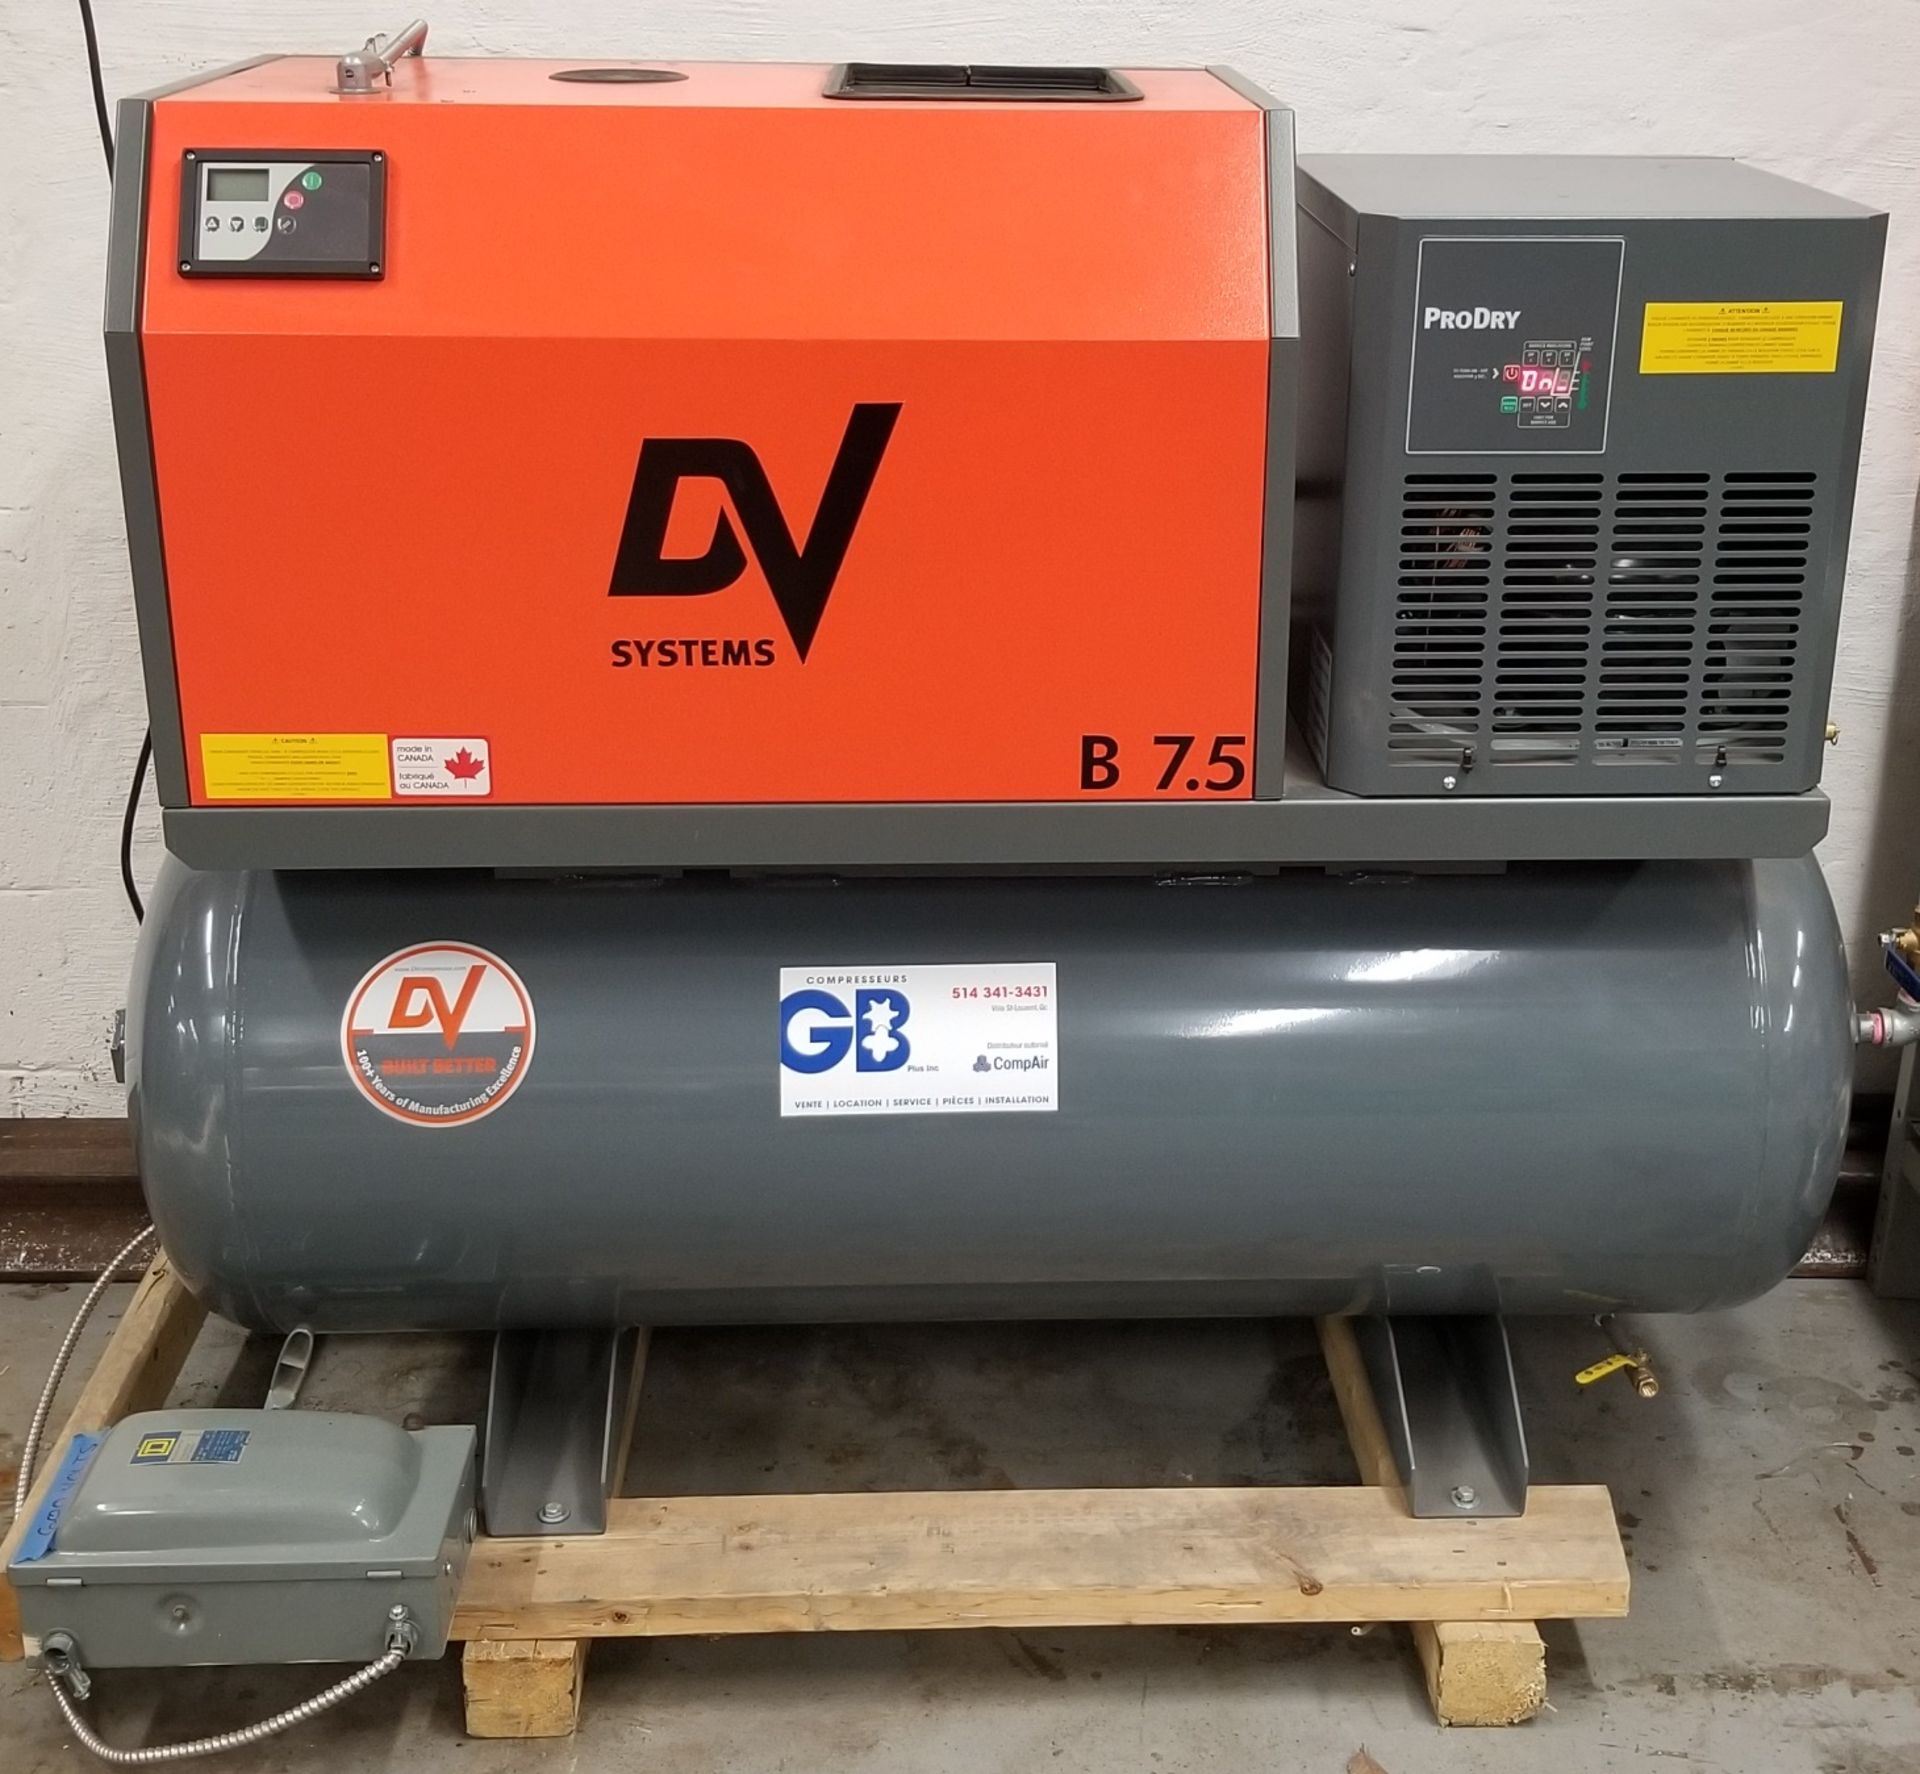 DV SYSTEMS (2020) B7.5 TANK-MOUNTED ROTARY SCREW AIR COMPRESSOR WITH 7.5 HP, 145 MAX. PSI, 27